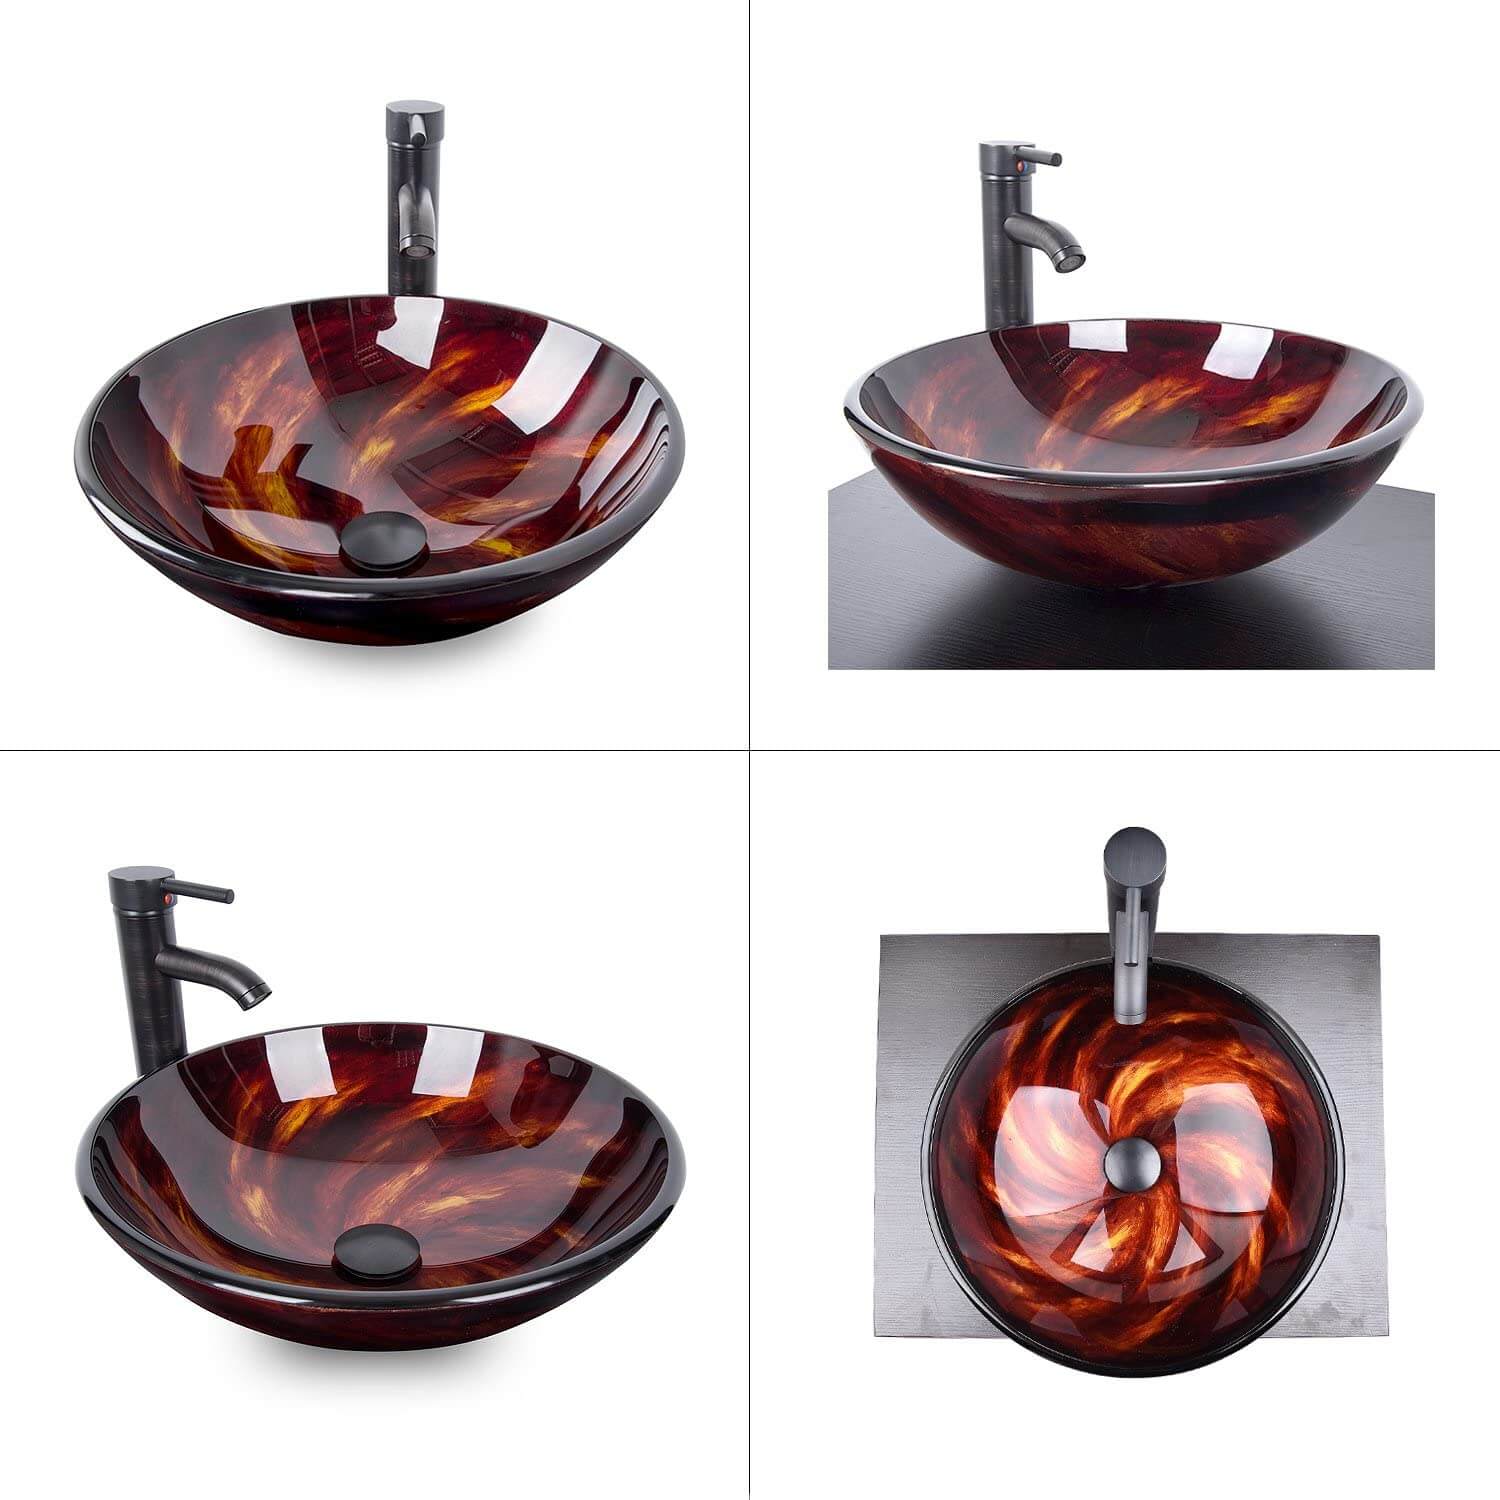 4 angle views of Elecwish flame red round sink